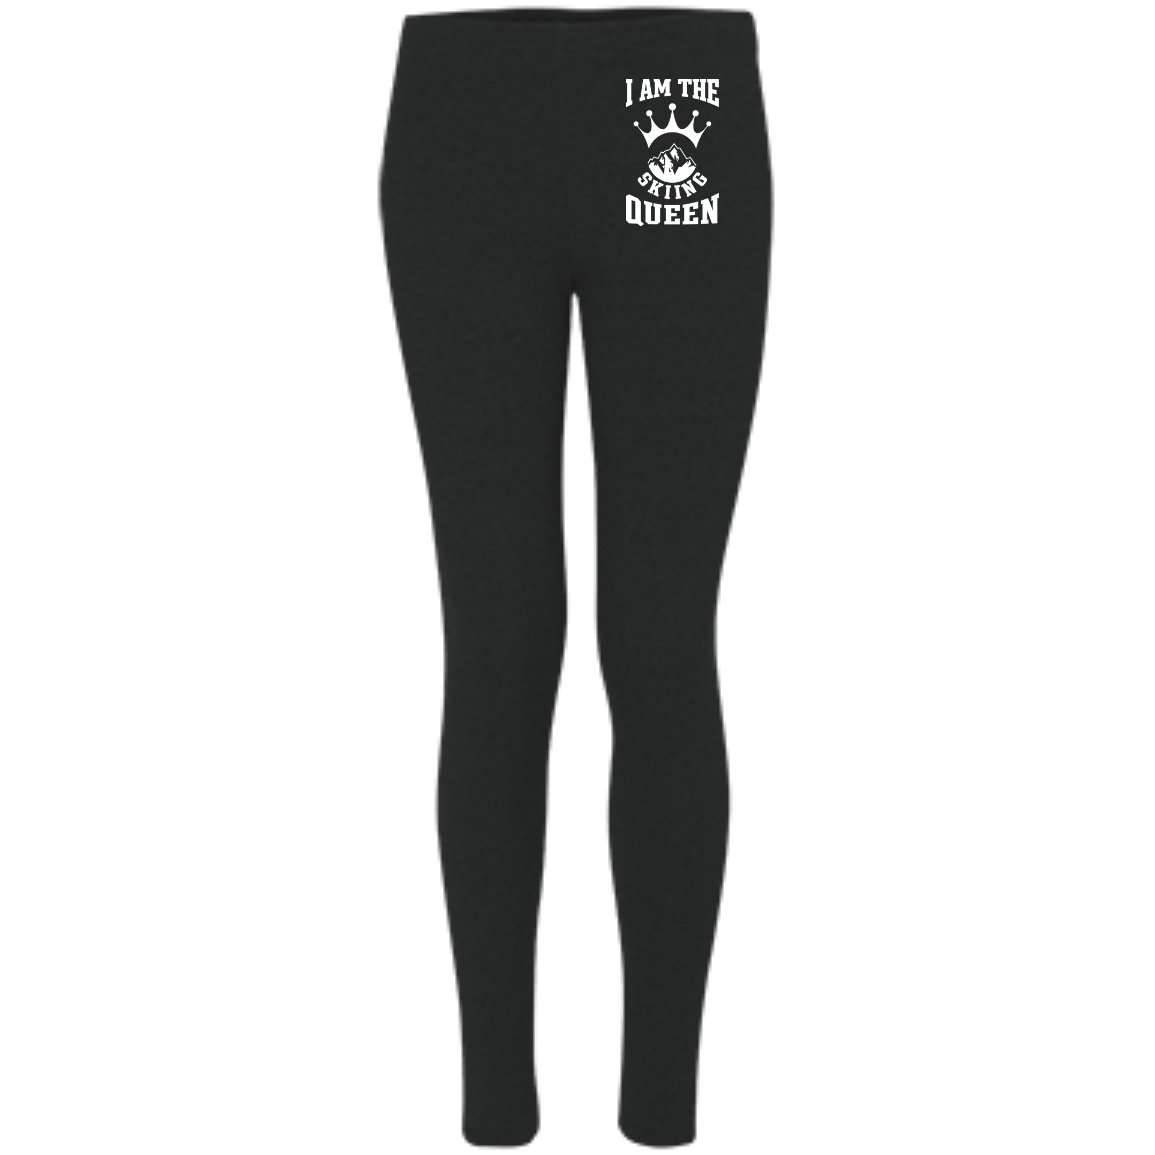 I am The Skiing Queen Women's Embroidered Leggings - Powderaddicts